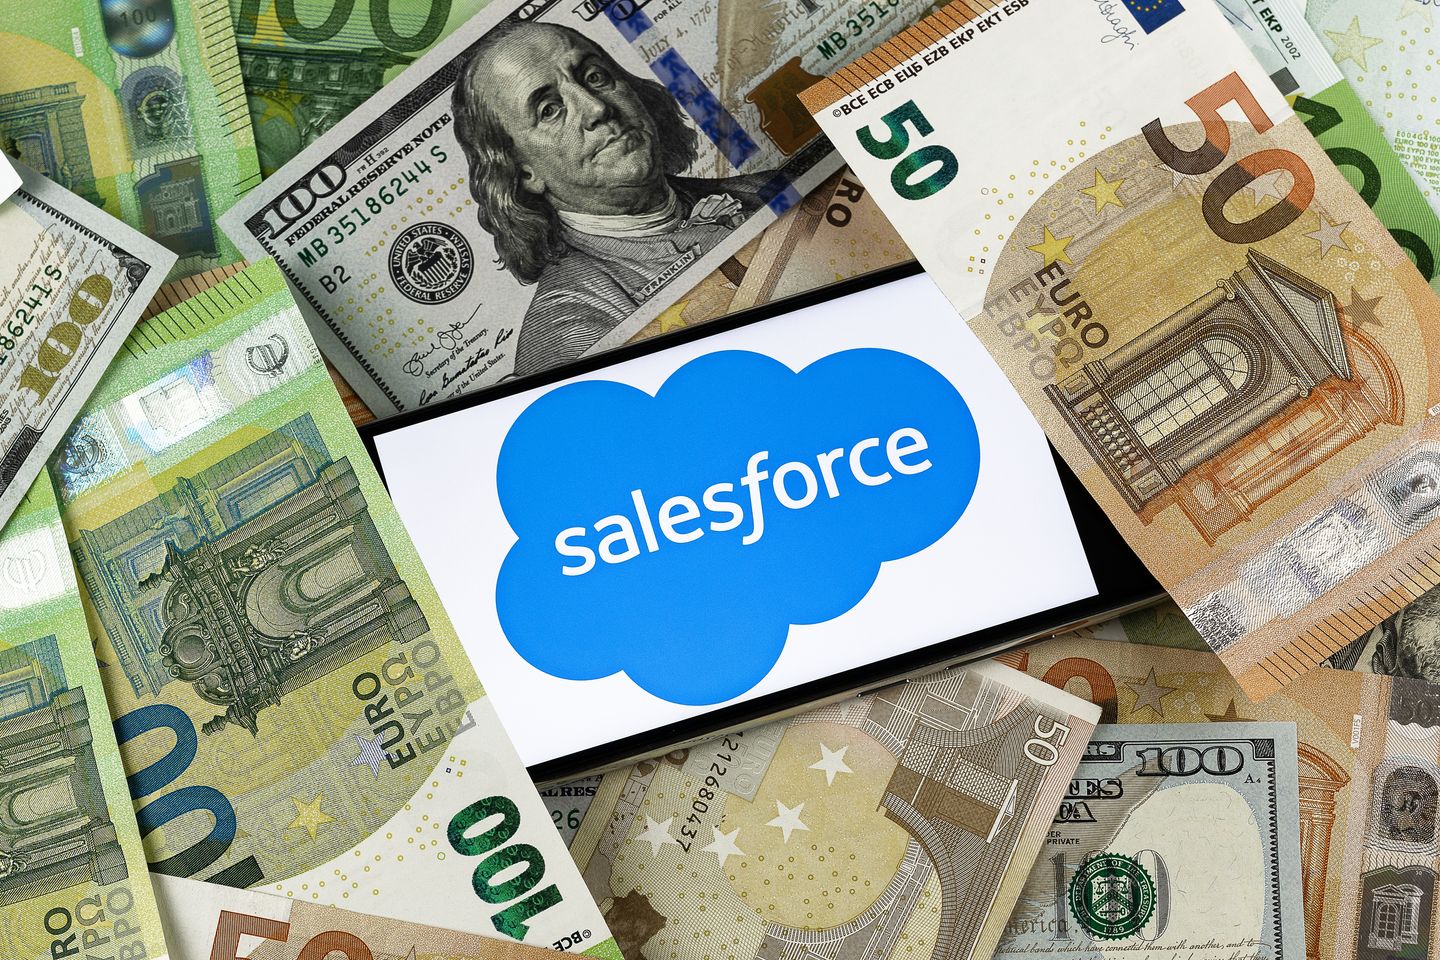 Salesforce is better with integrations